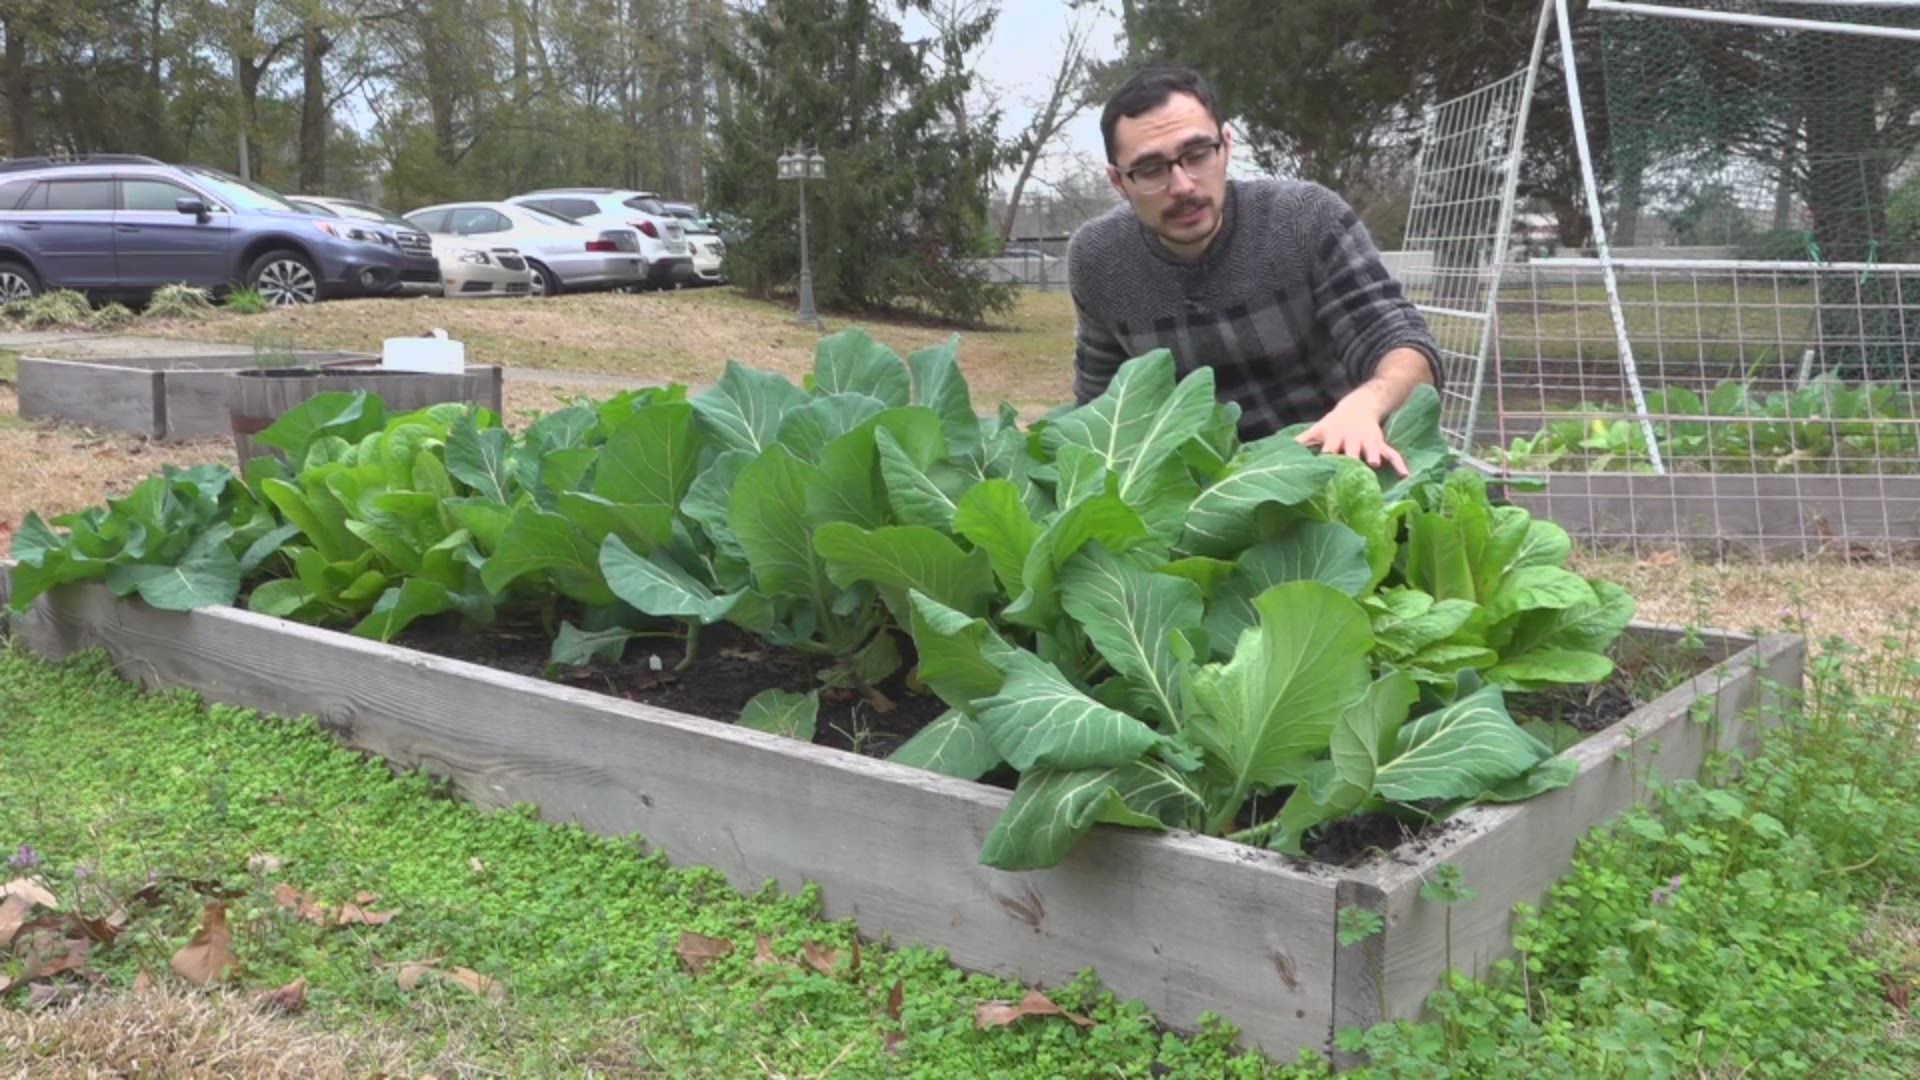 Meteorologist Alex Calamia gives us a tour of what he’s growing in our garden in the middle of winter.